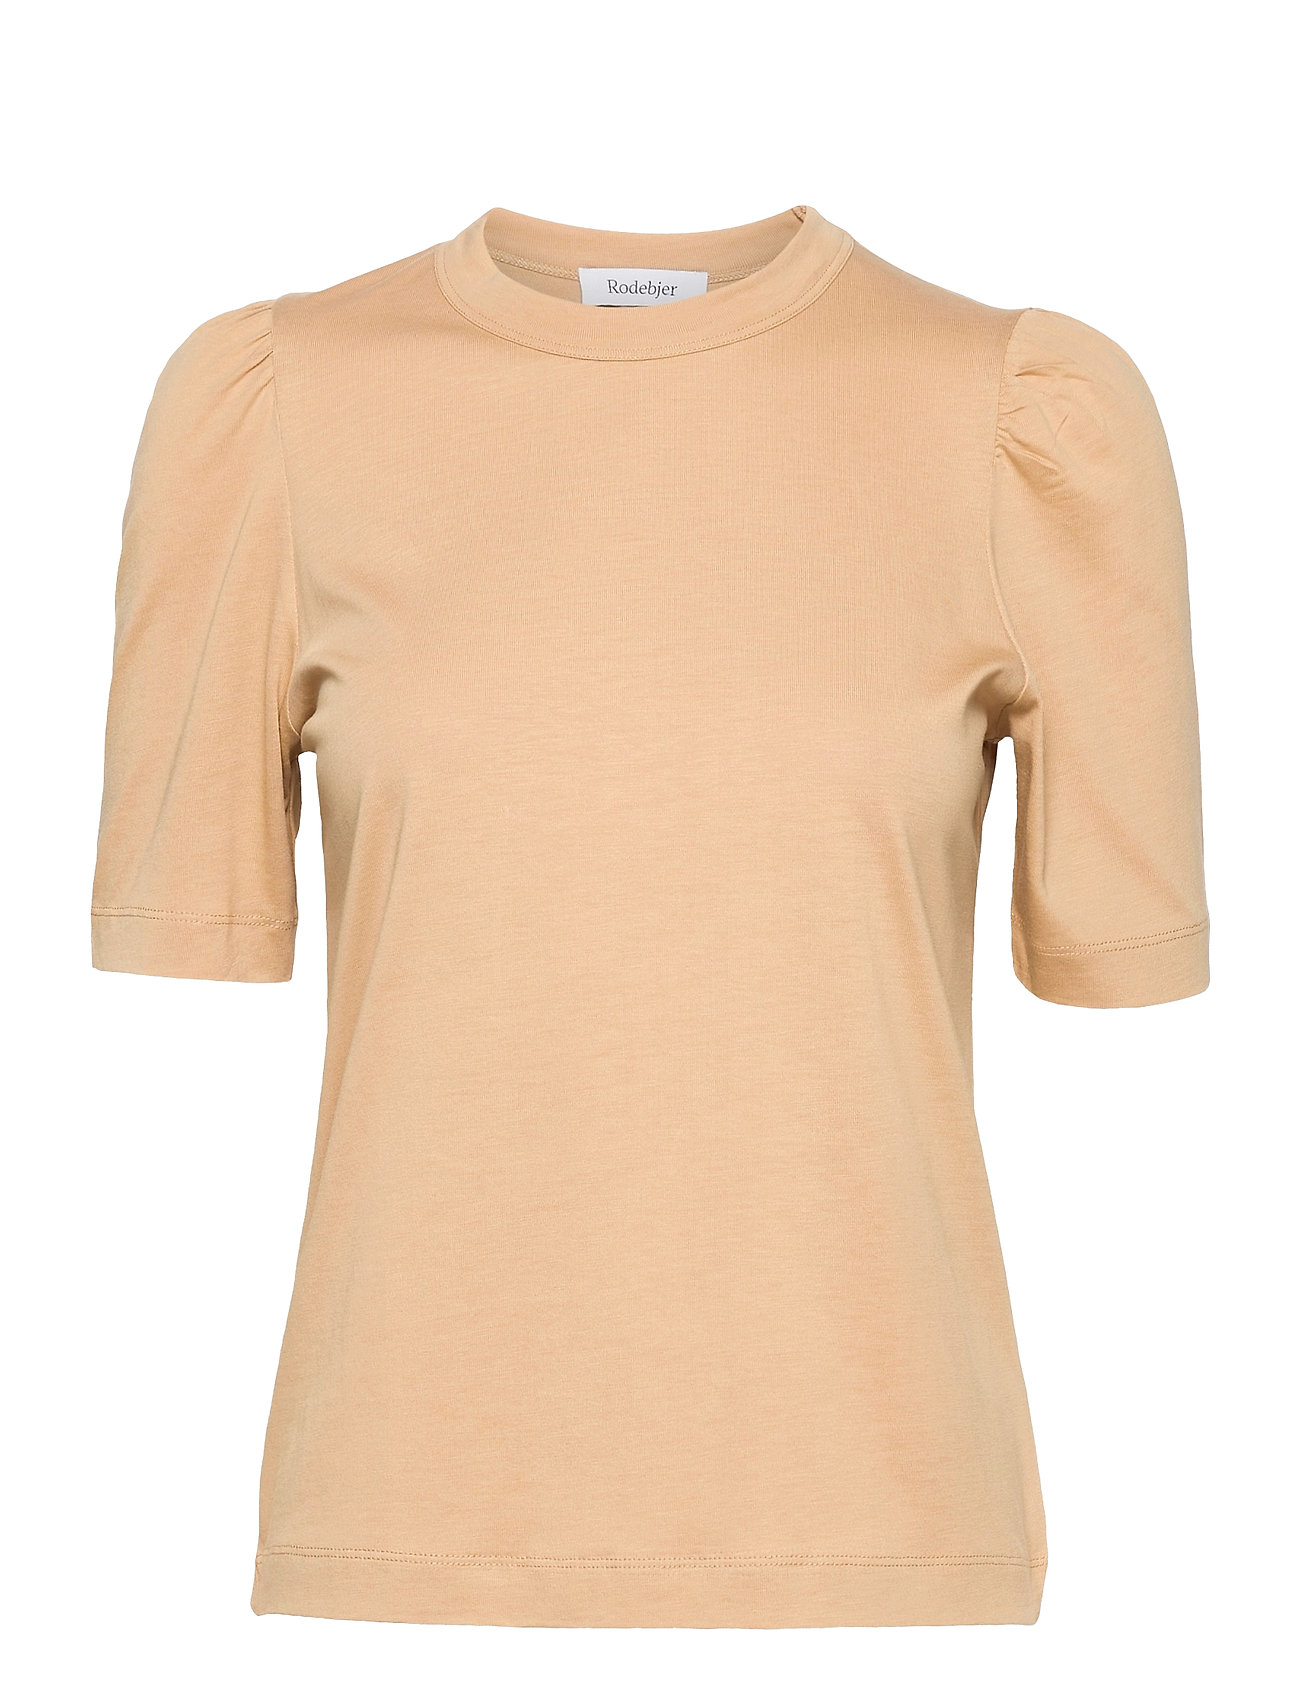 Rodebjer Dory T-shirts & Tops Short-sleeved Beige RODEBJER